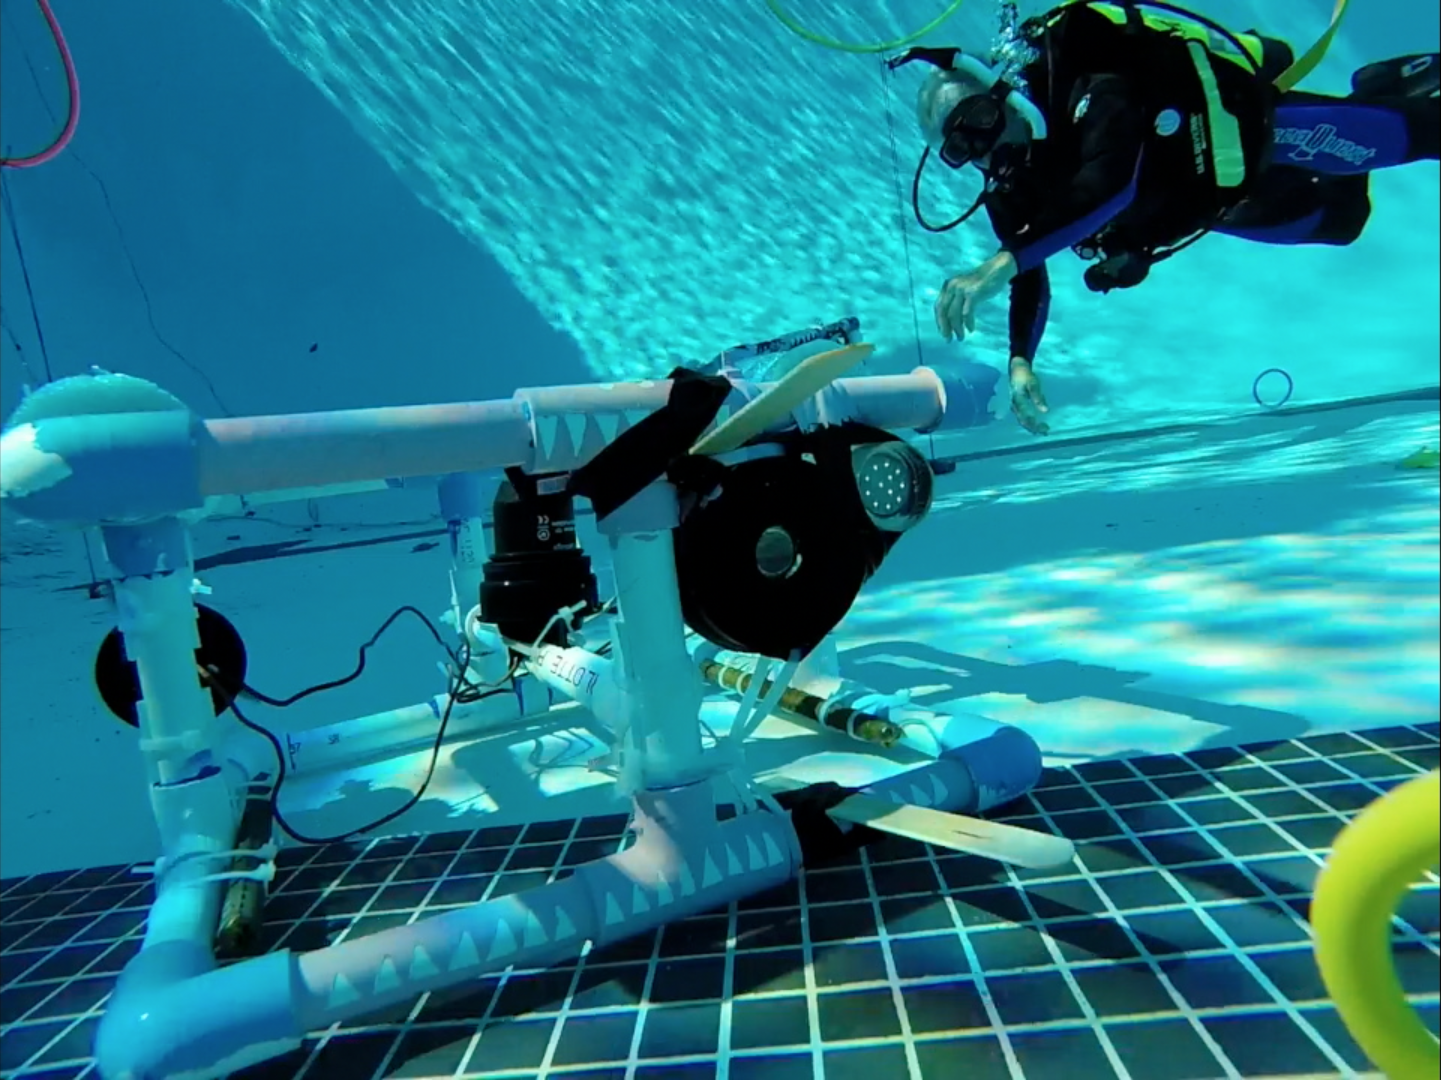 Video: Marine Science ROV Launch Day